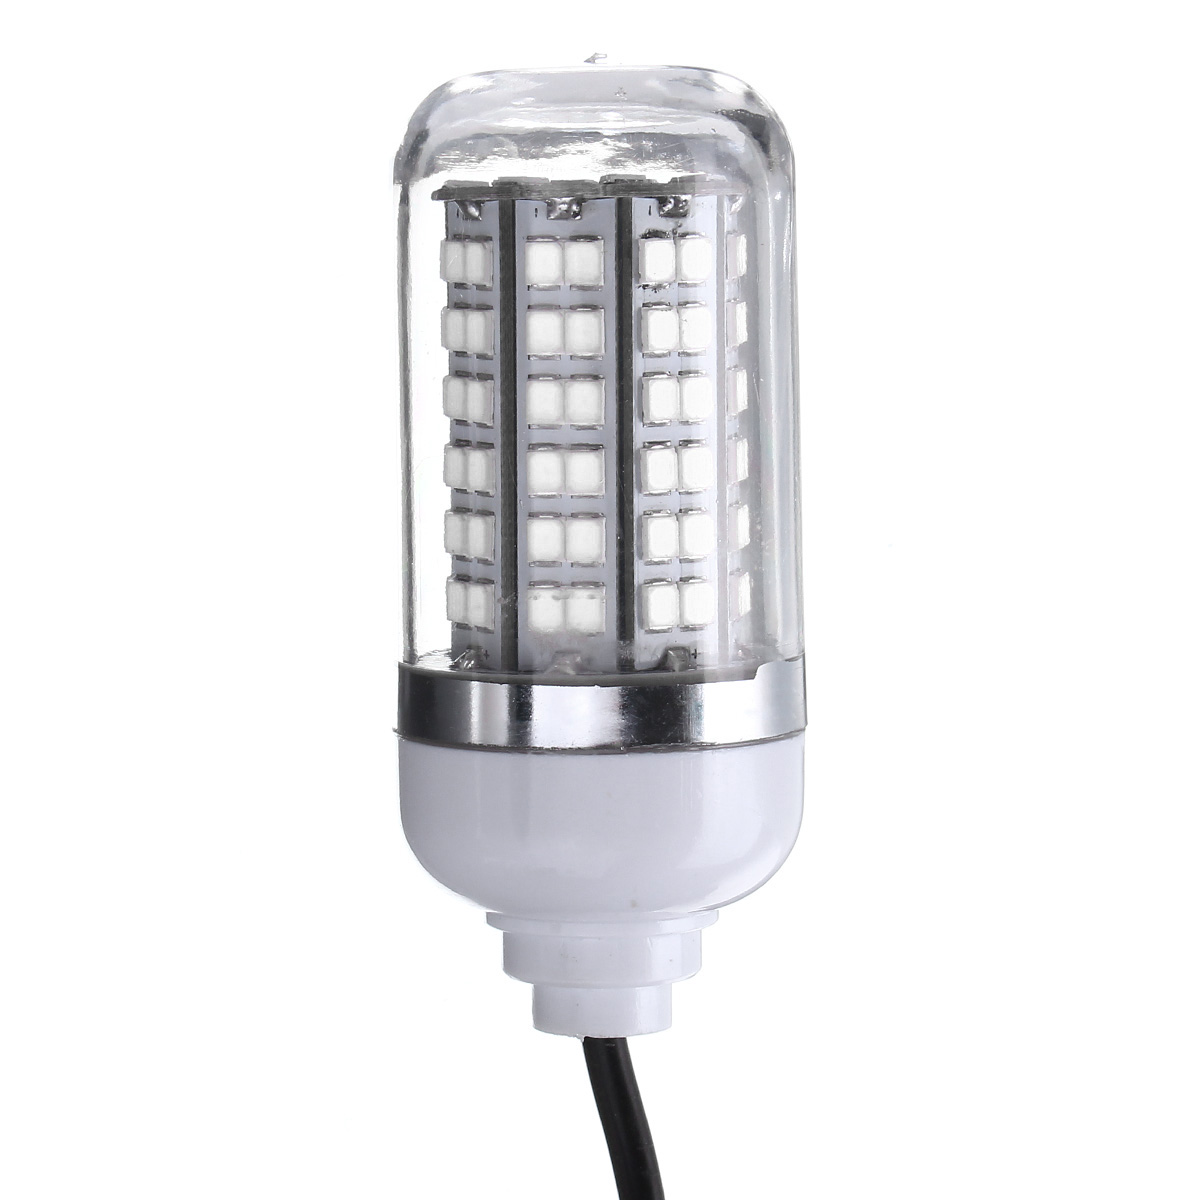 DC12V-7W-SMD2835-108-Underwater-LED-Fishing-Night-Boat-Attracts-Fish-Squid-Light-Bulb-with-Switch-1276984-3